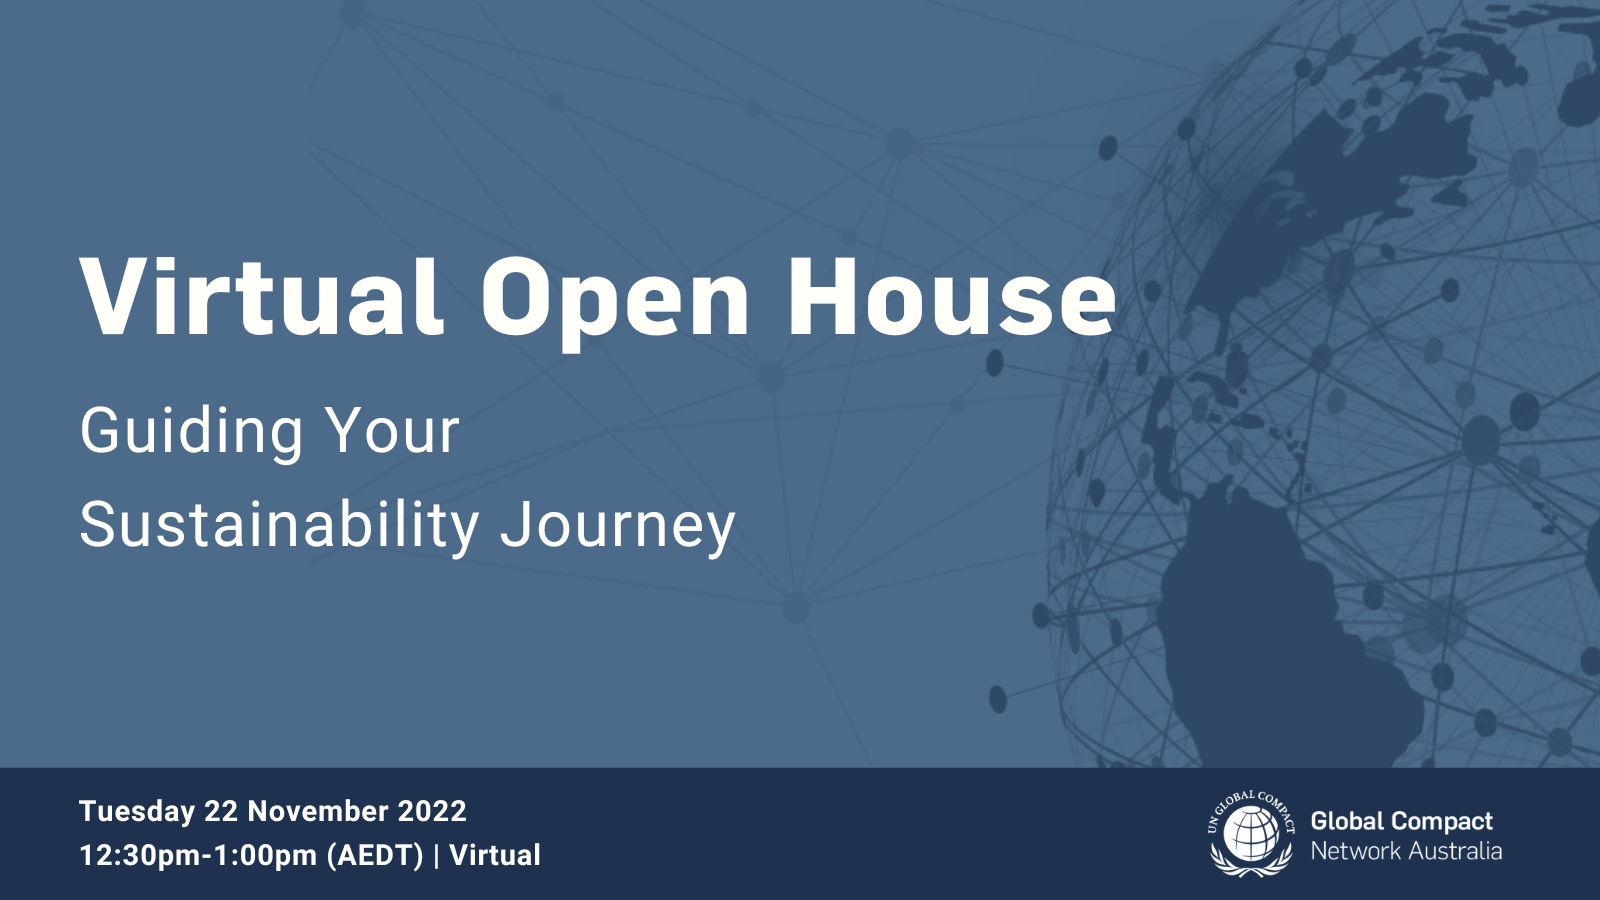 UN Global Compact Network Australia Virtual Open House: Guiding your sustainability journey